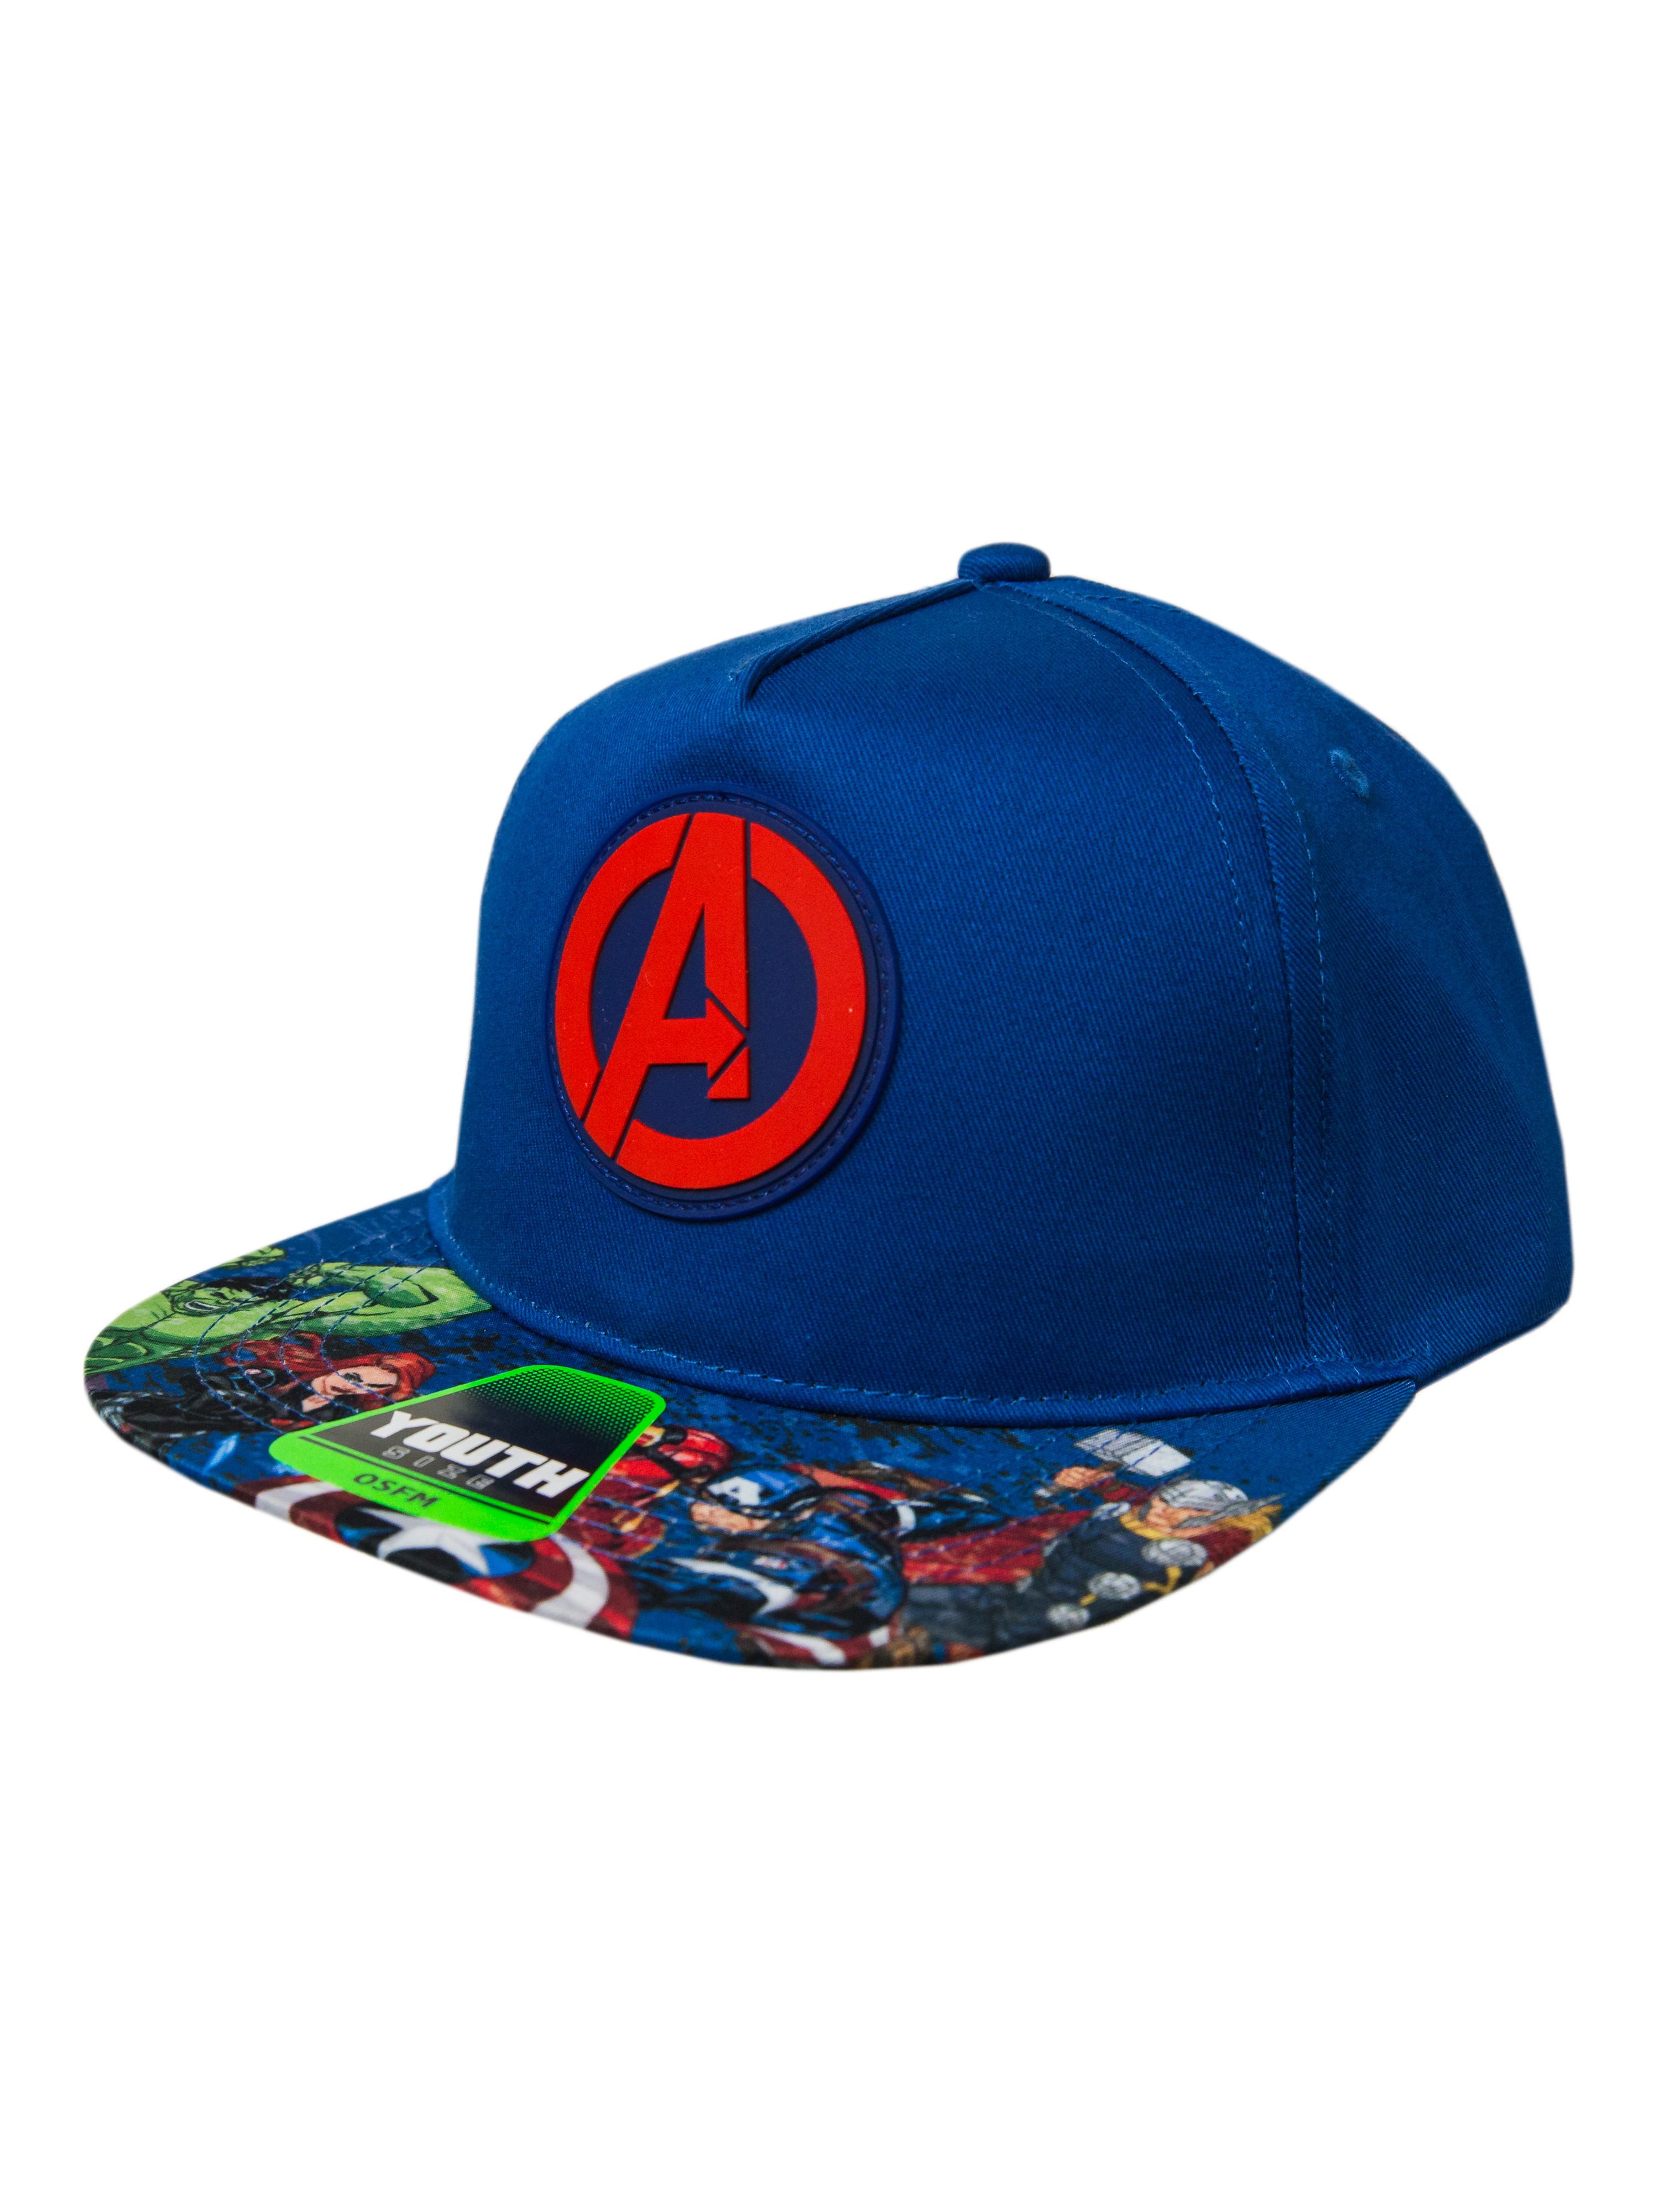 Marvel Avengers Boys Baseball Hat And Tri-Fold Wallet Combo, Youth Size - image 3 of 6